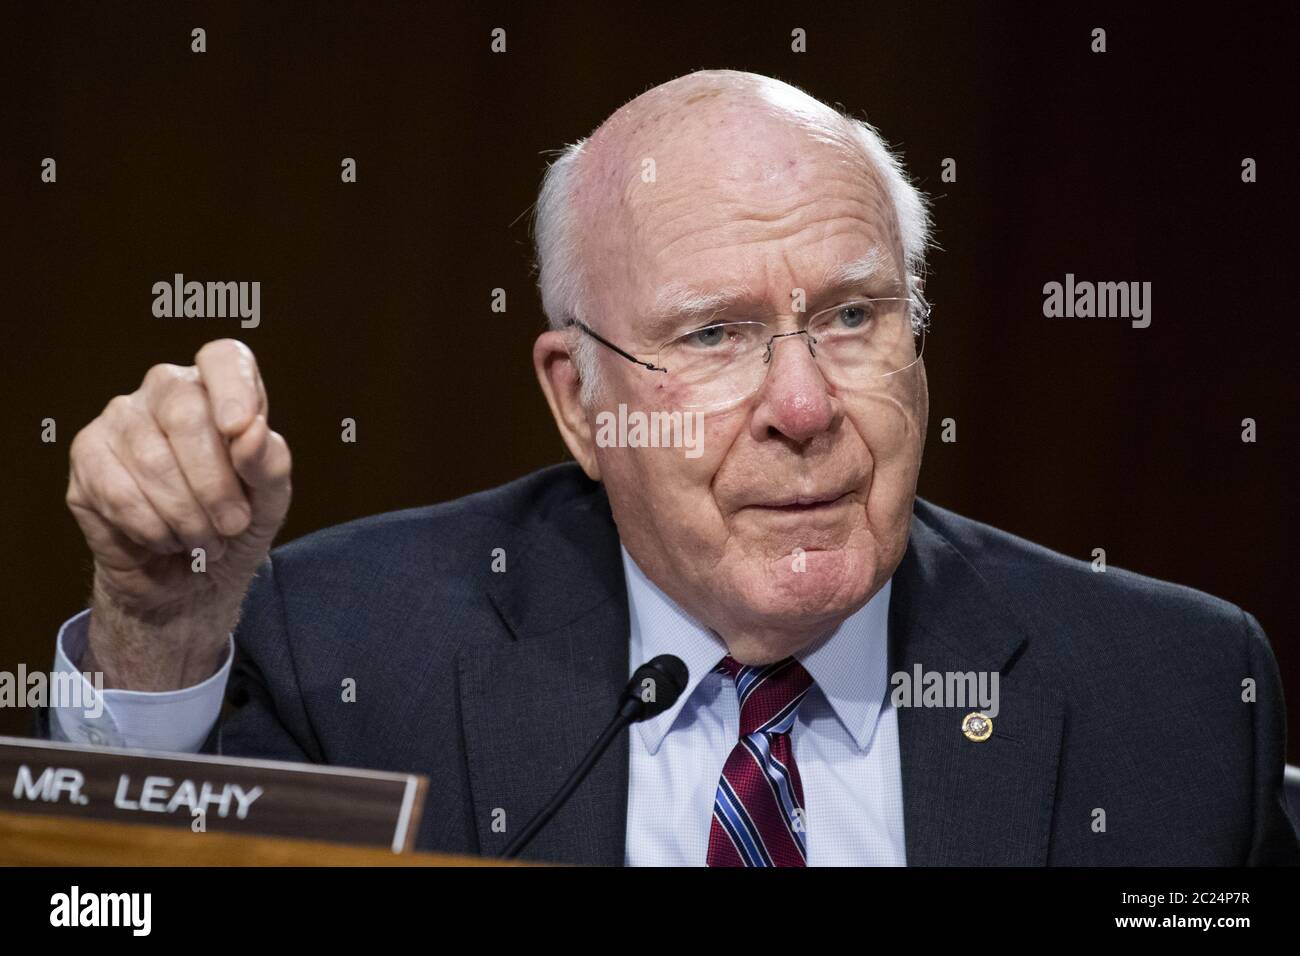 Washington, United States. 16th June, 2020. Sen. Patrick Leahy, D-Vt., asks a question during a Senate Judiciary Committee hearing to examine issues involving race and policing practices in the aftermath of the death in Minneapolis police custody of George Floyd and the civil unrest that followed on Capitol Hill in Washington, DC on Tuesday, June 16, 2020. Pool Photo by Tom Williams/UPI Credit: UPI/Alamy Live News Stock Photo